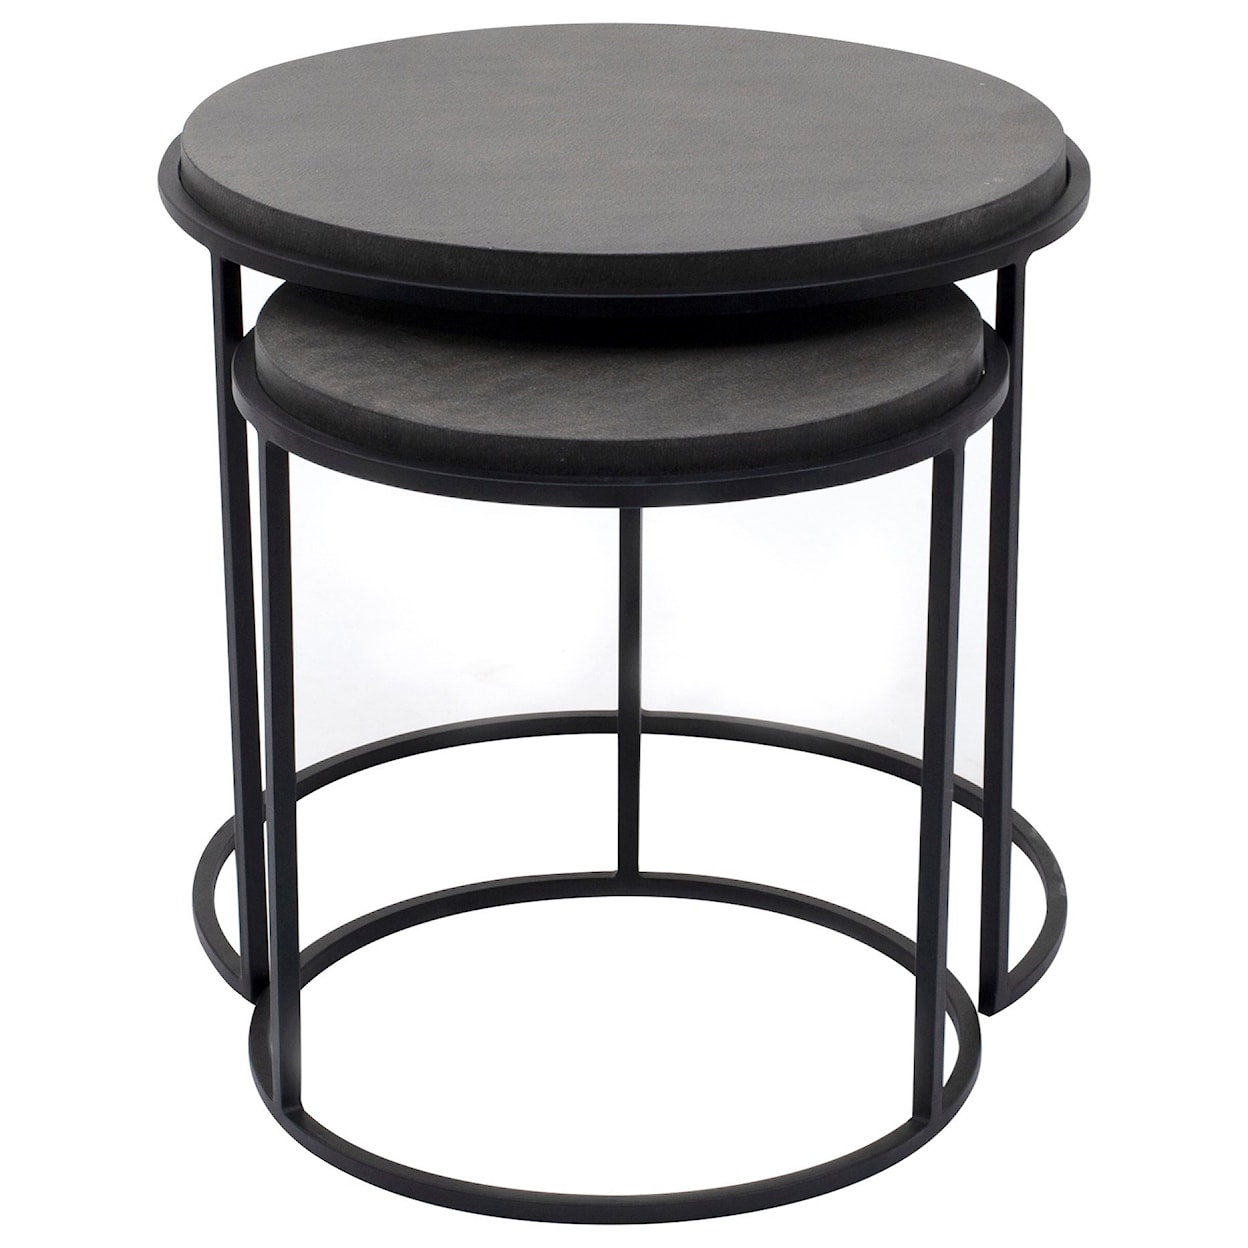 Moe's Home Collection Roost Set of 2 Nesting Tables